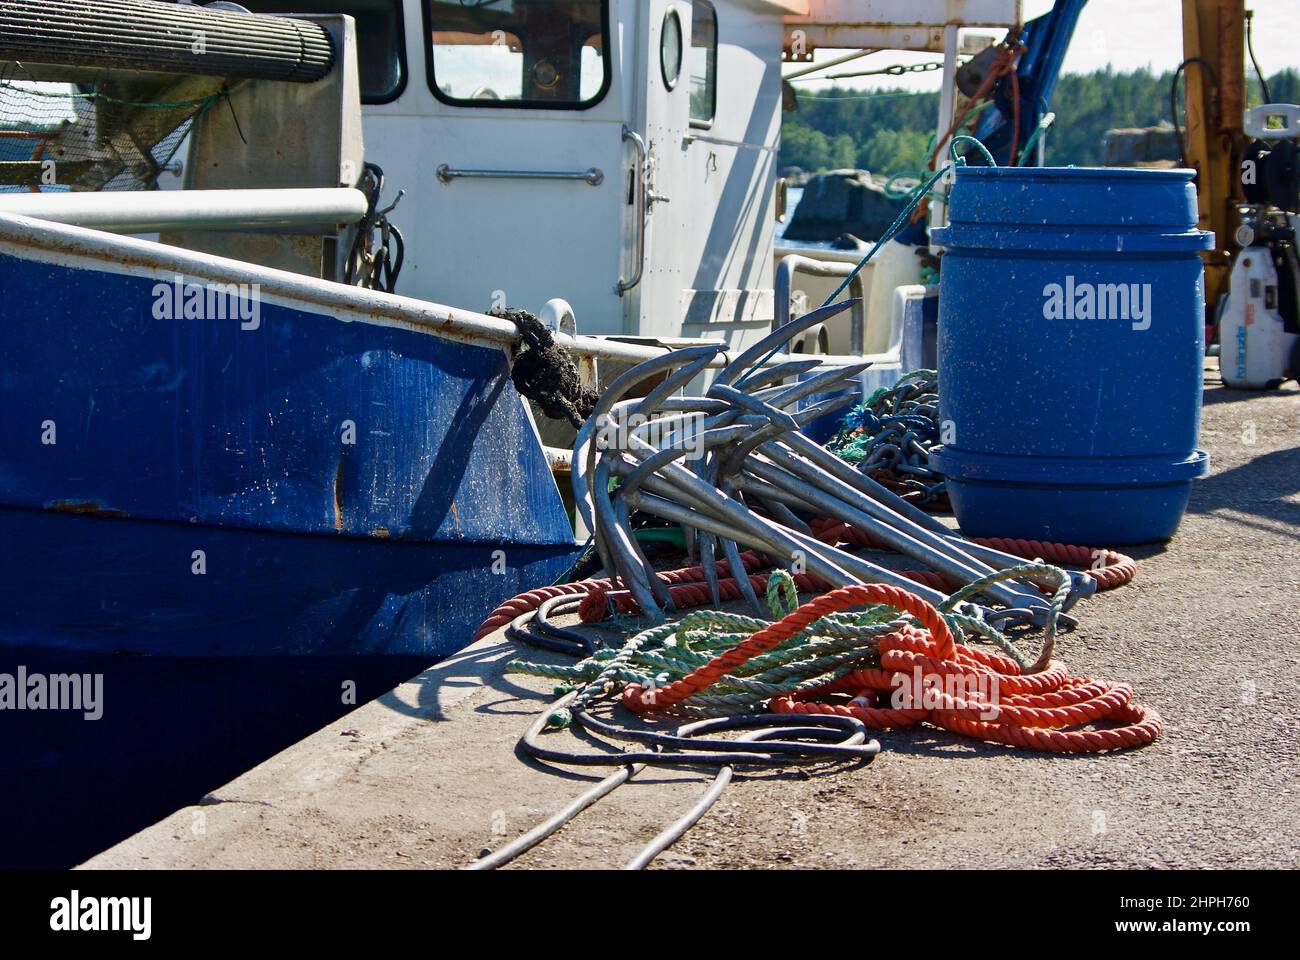 Fishing equipment on the quay in front of an industrial fishing boat in a harbor. Stock Photo